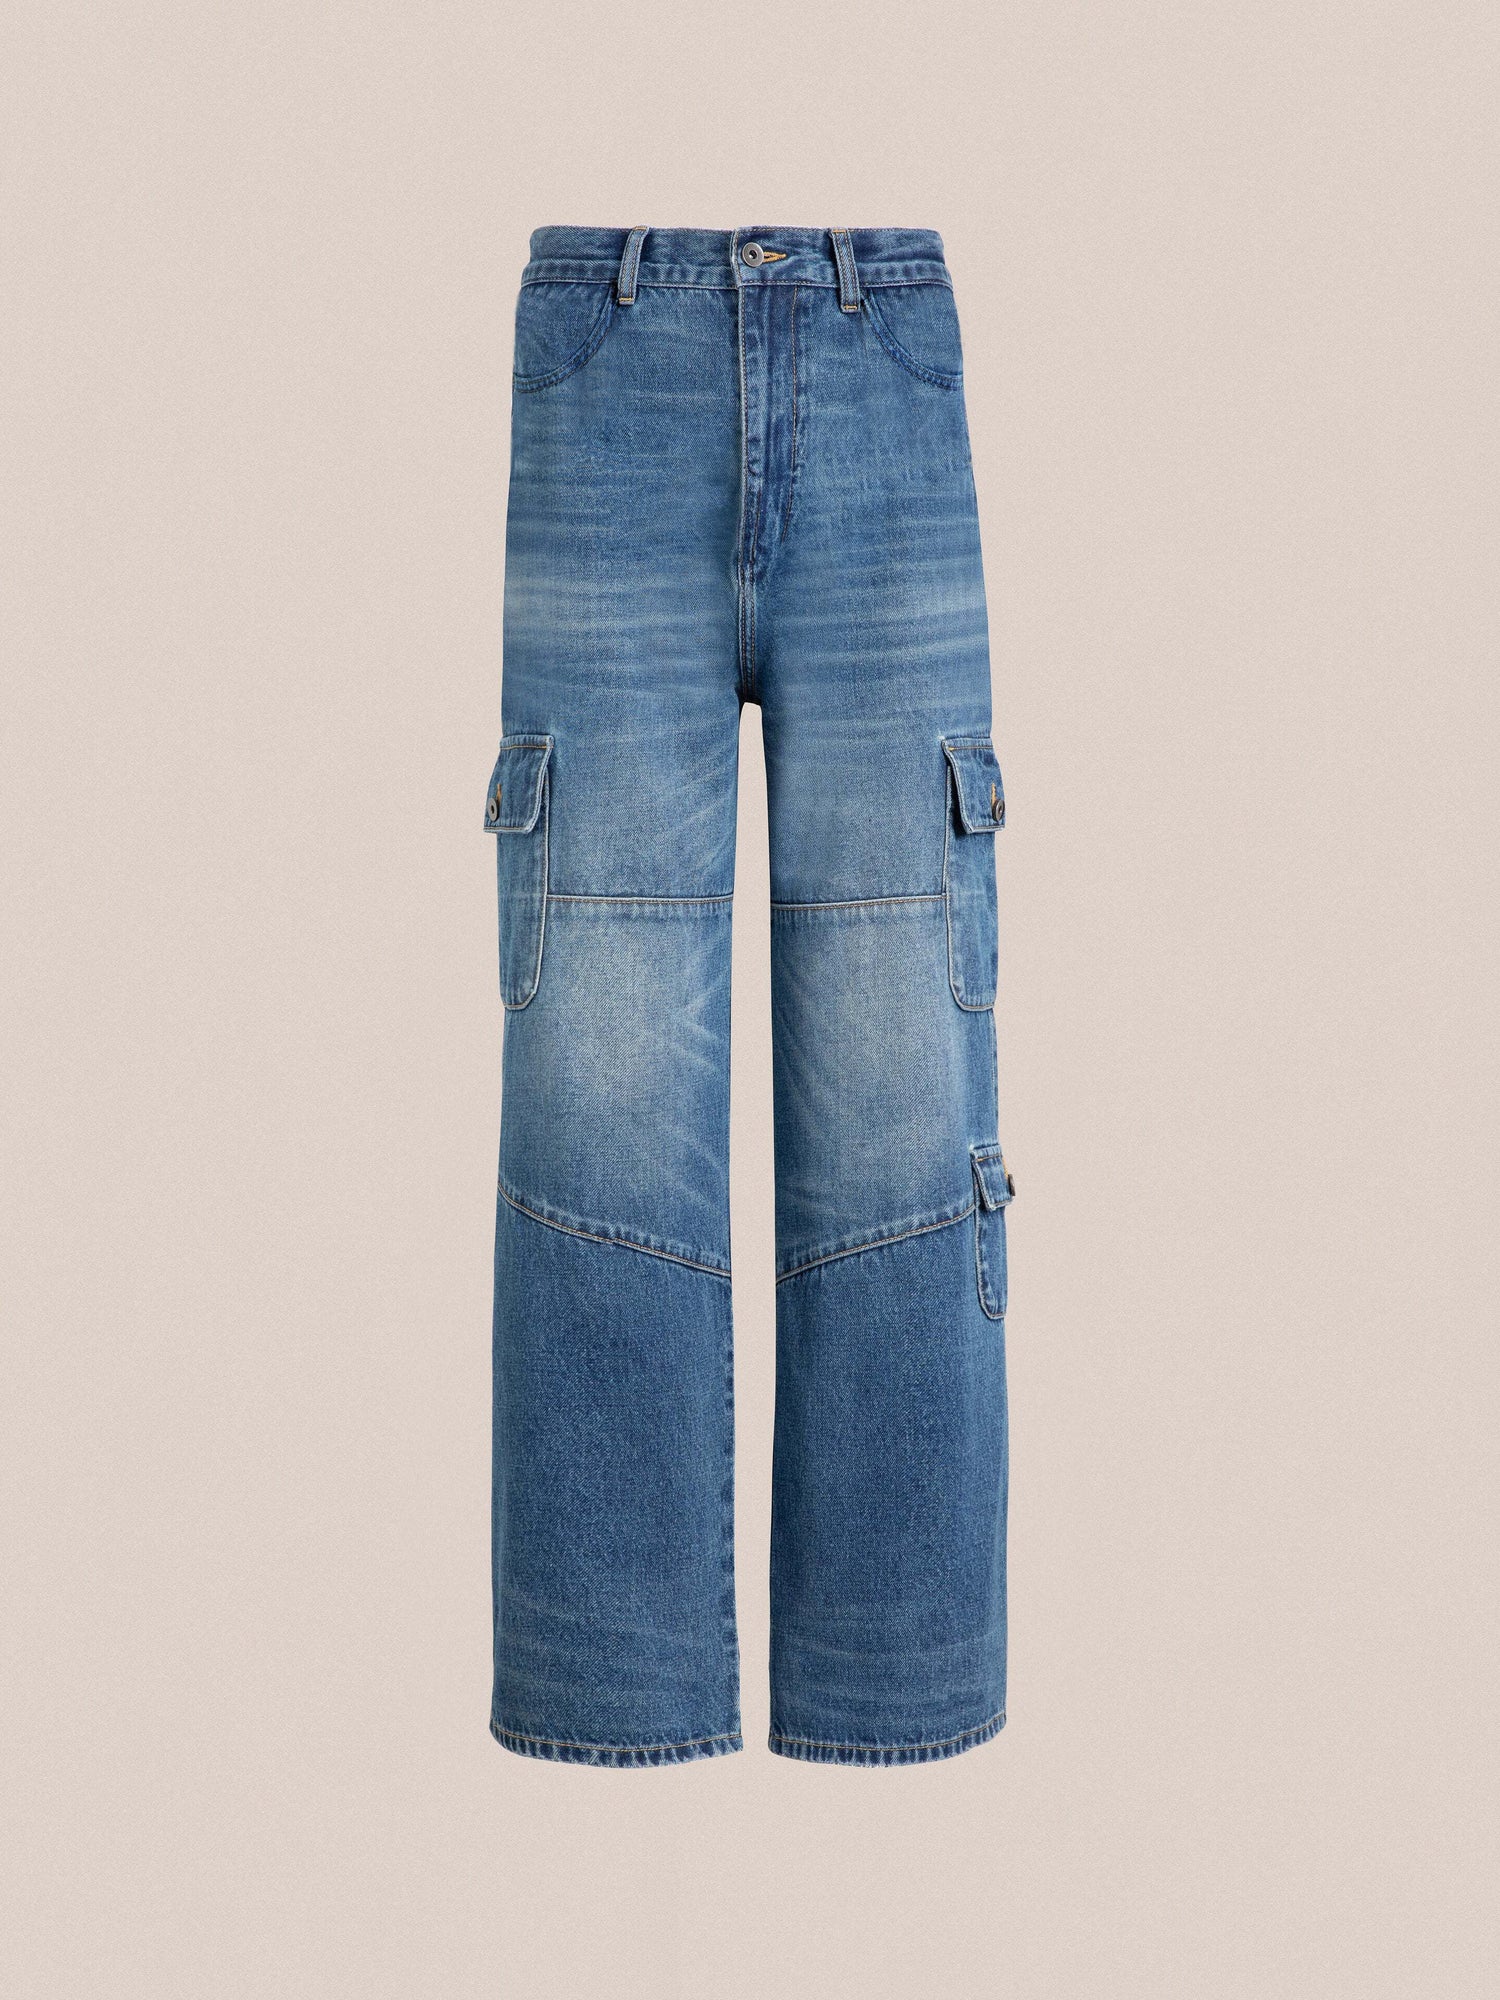 Siwa Cargo Paneled Jeans with knee-length legs and cargo pockets, displayed against a plain, light background by Found.